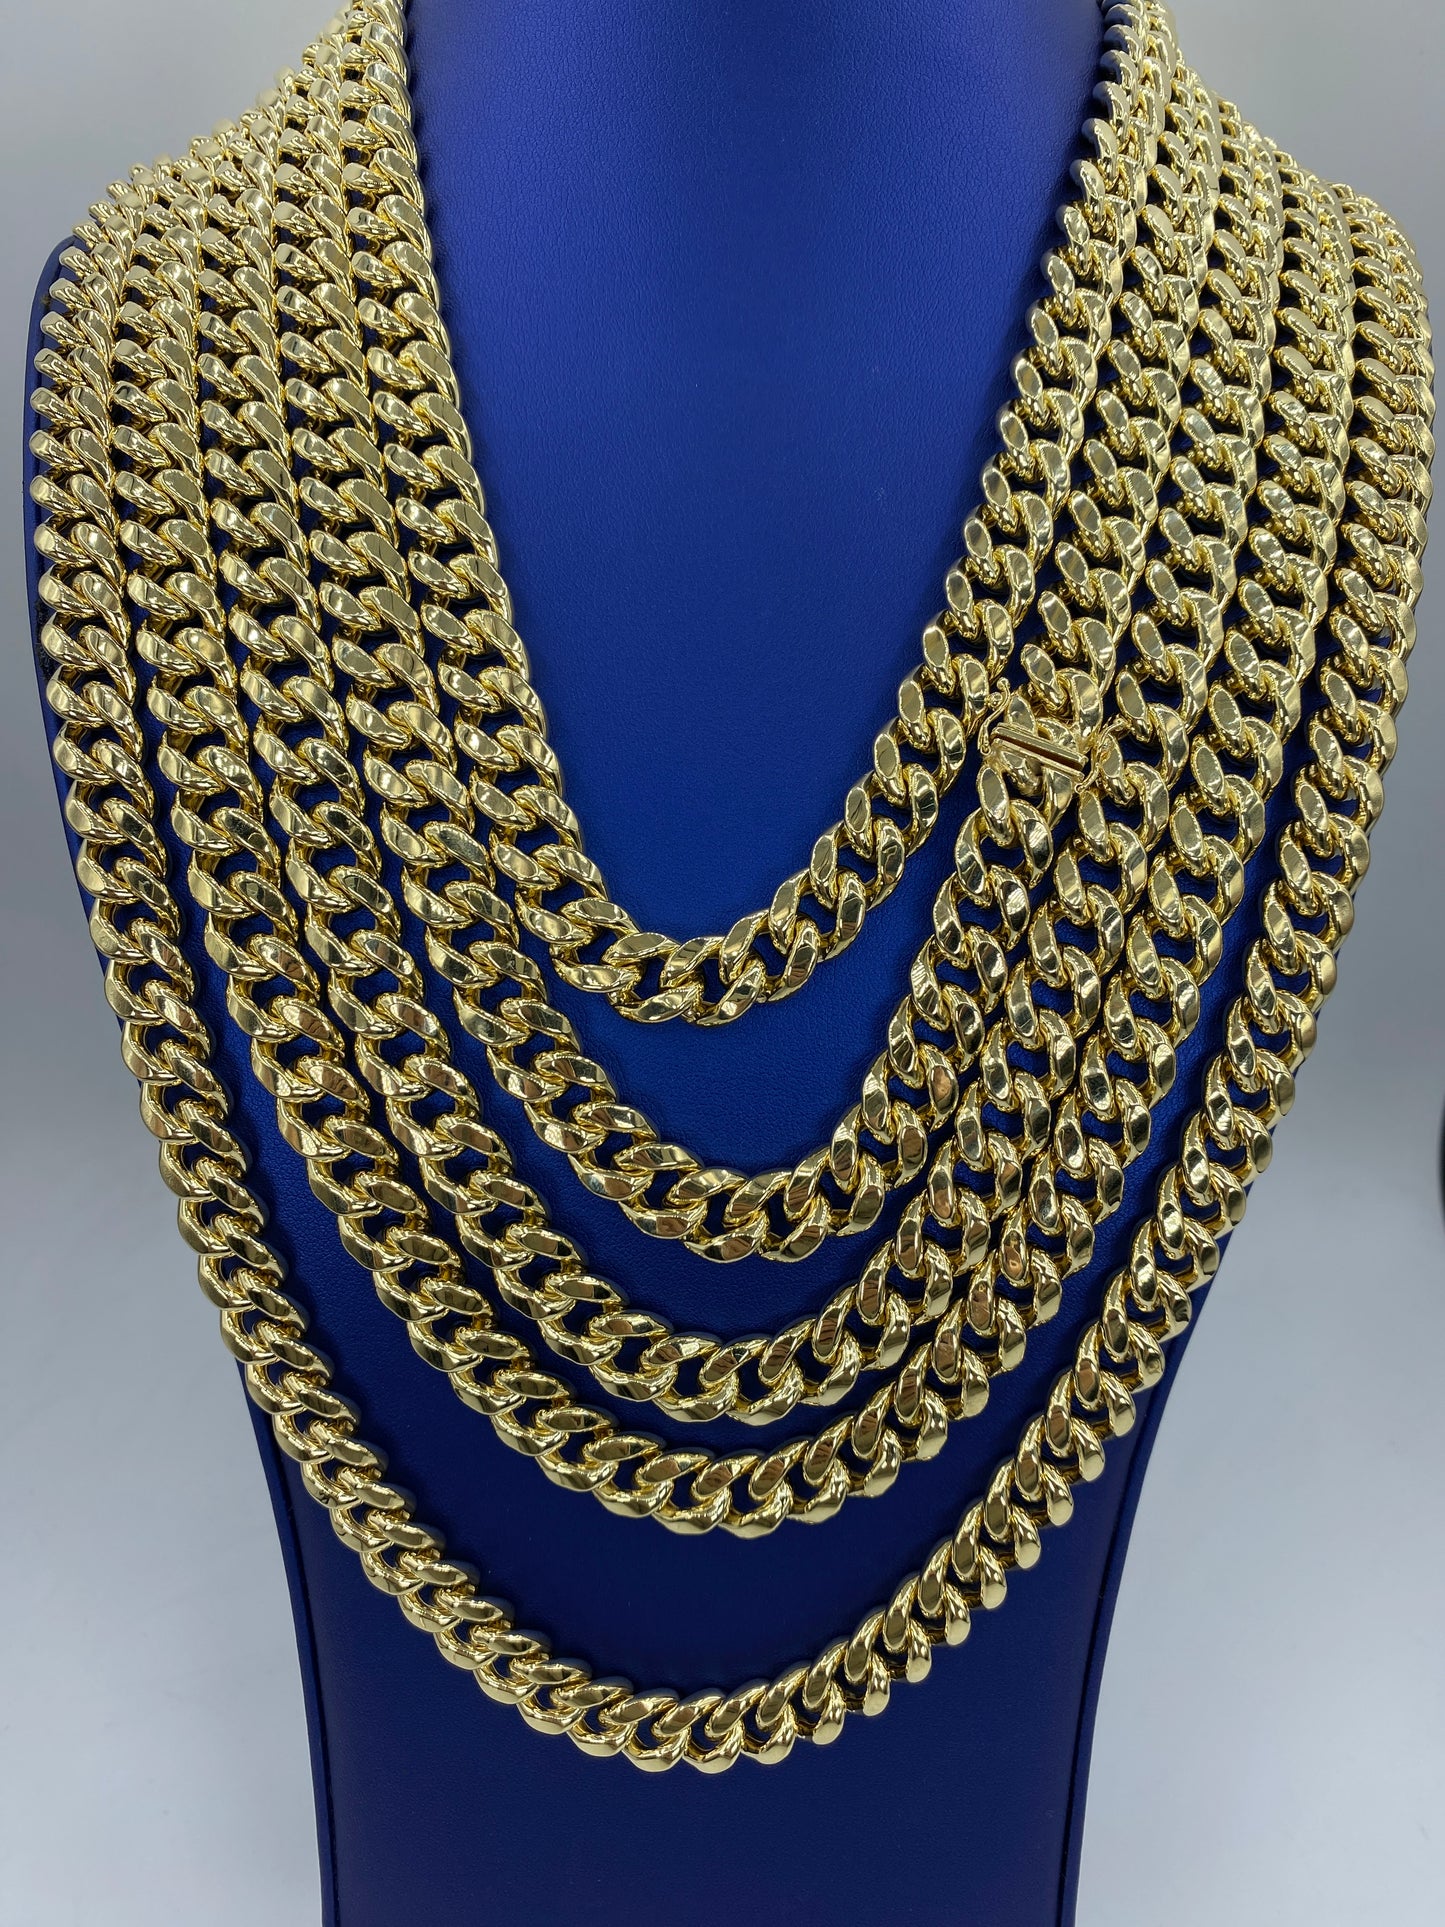 Miami Cuban Link Chain Real 10K Yellow Gold Full Collection